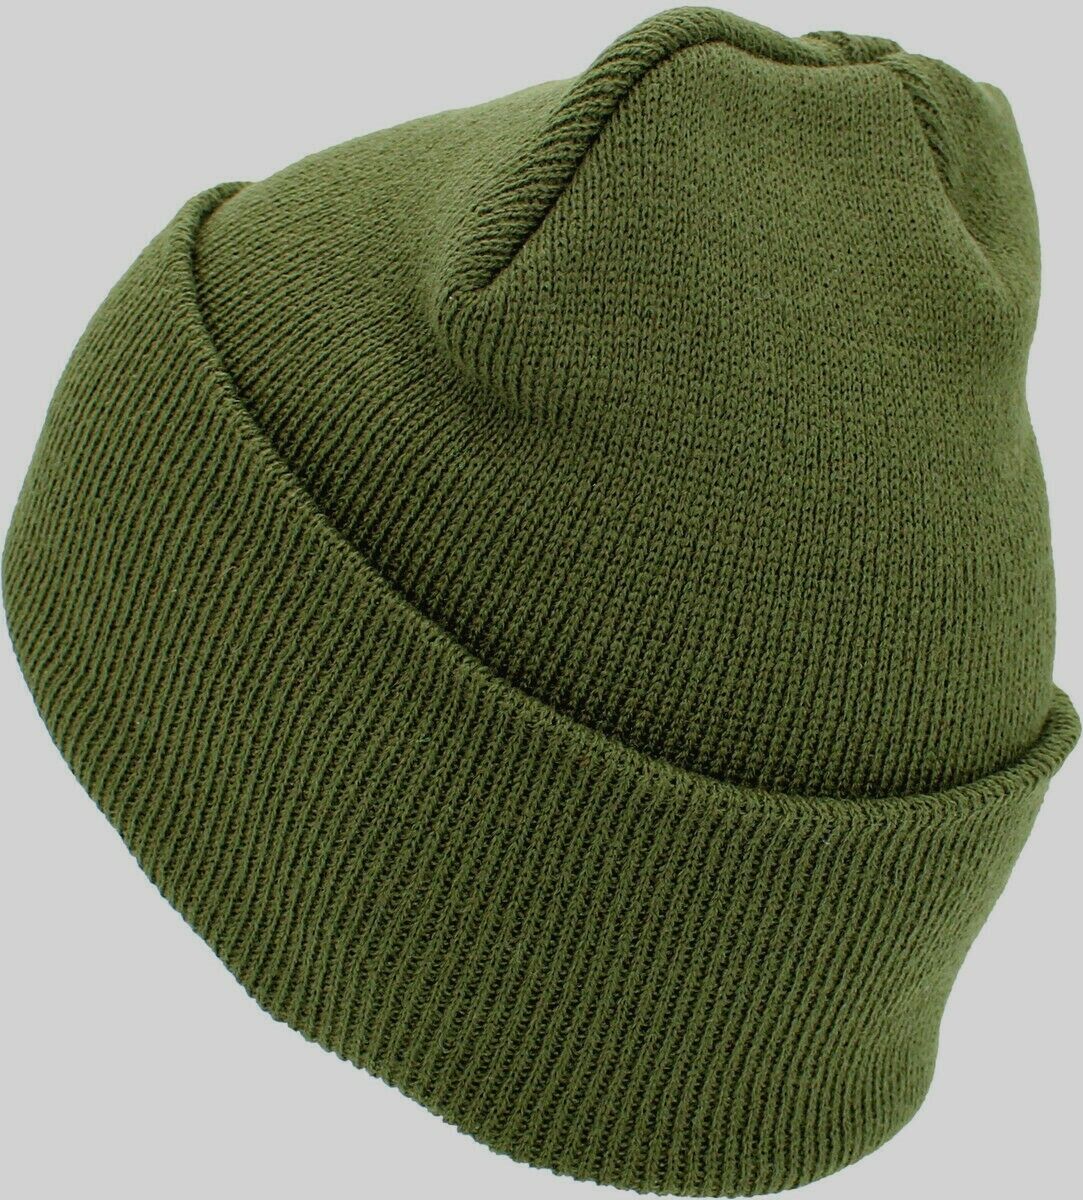 OD GREEN BEANIE WATCH CAP COLD WEATHER KNIT HAT USA MADE